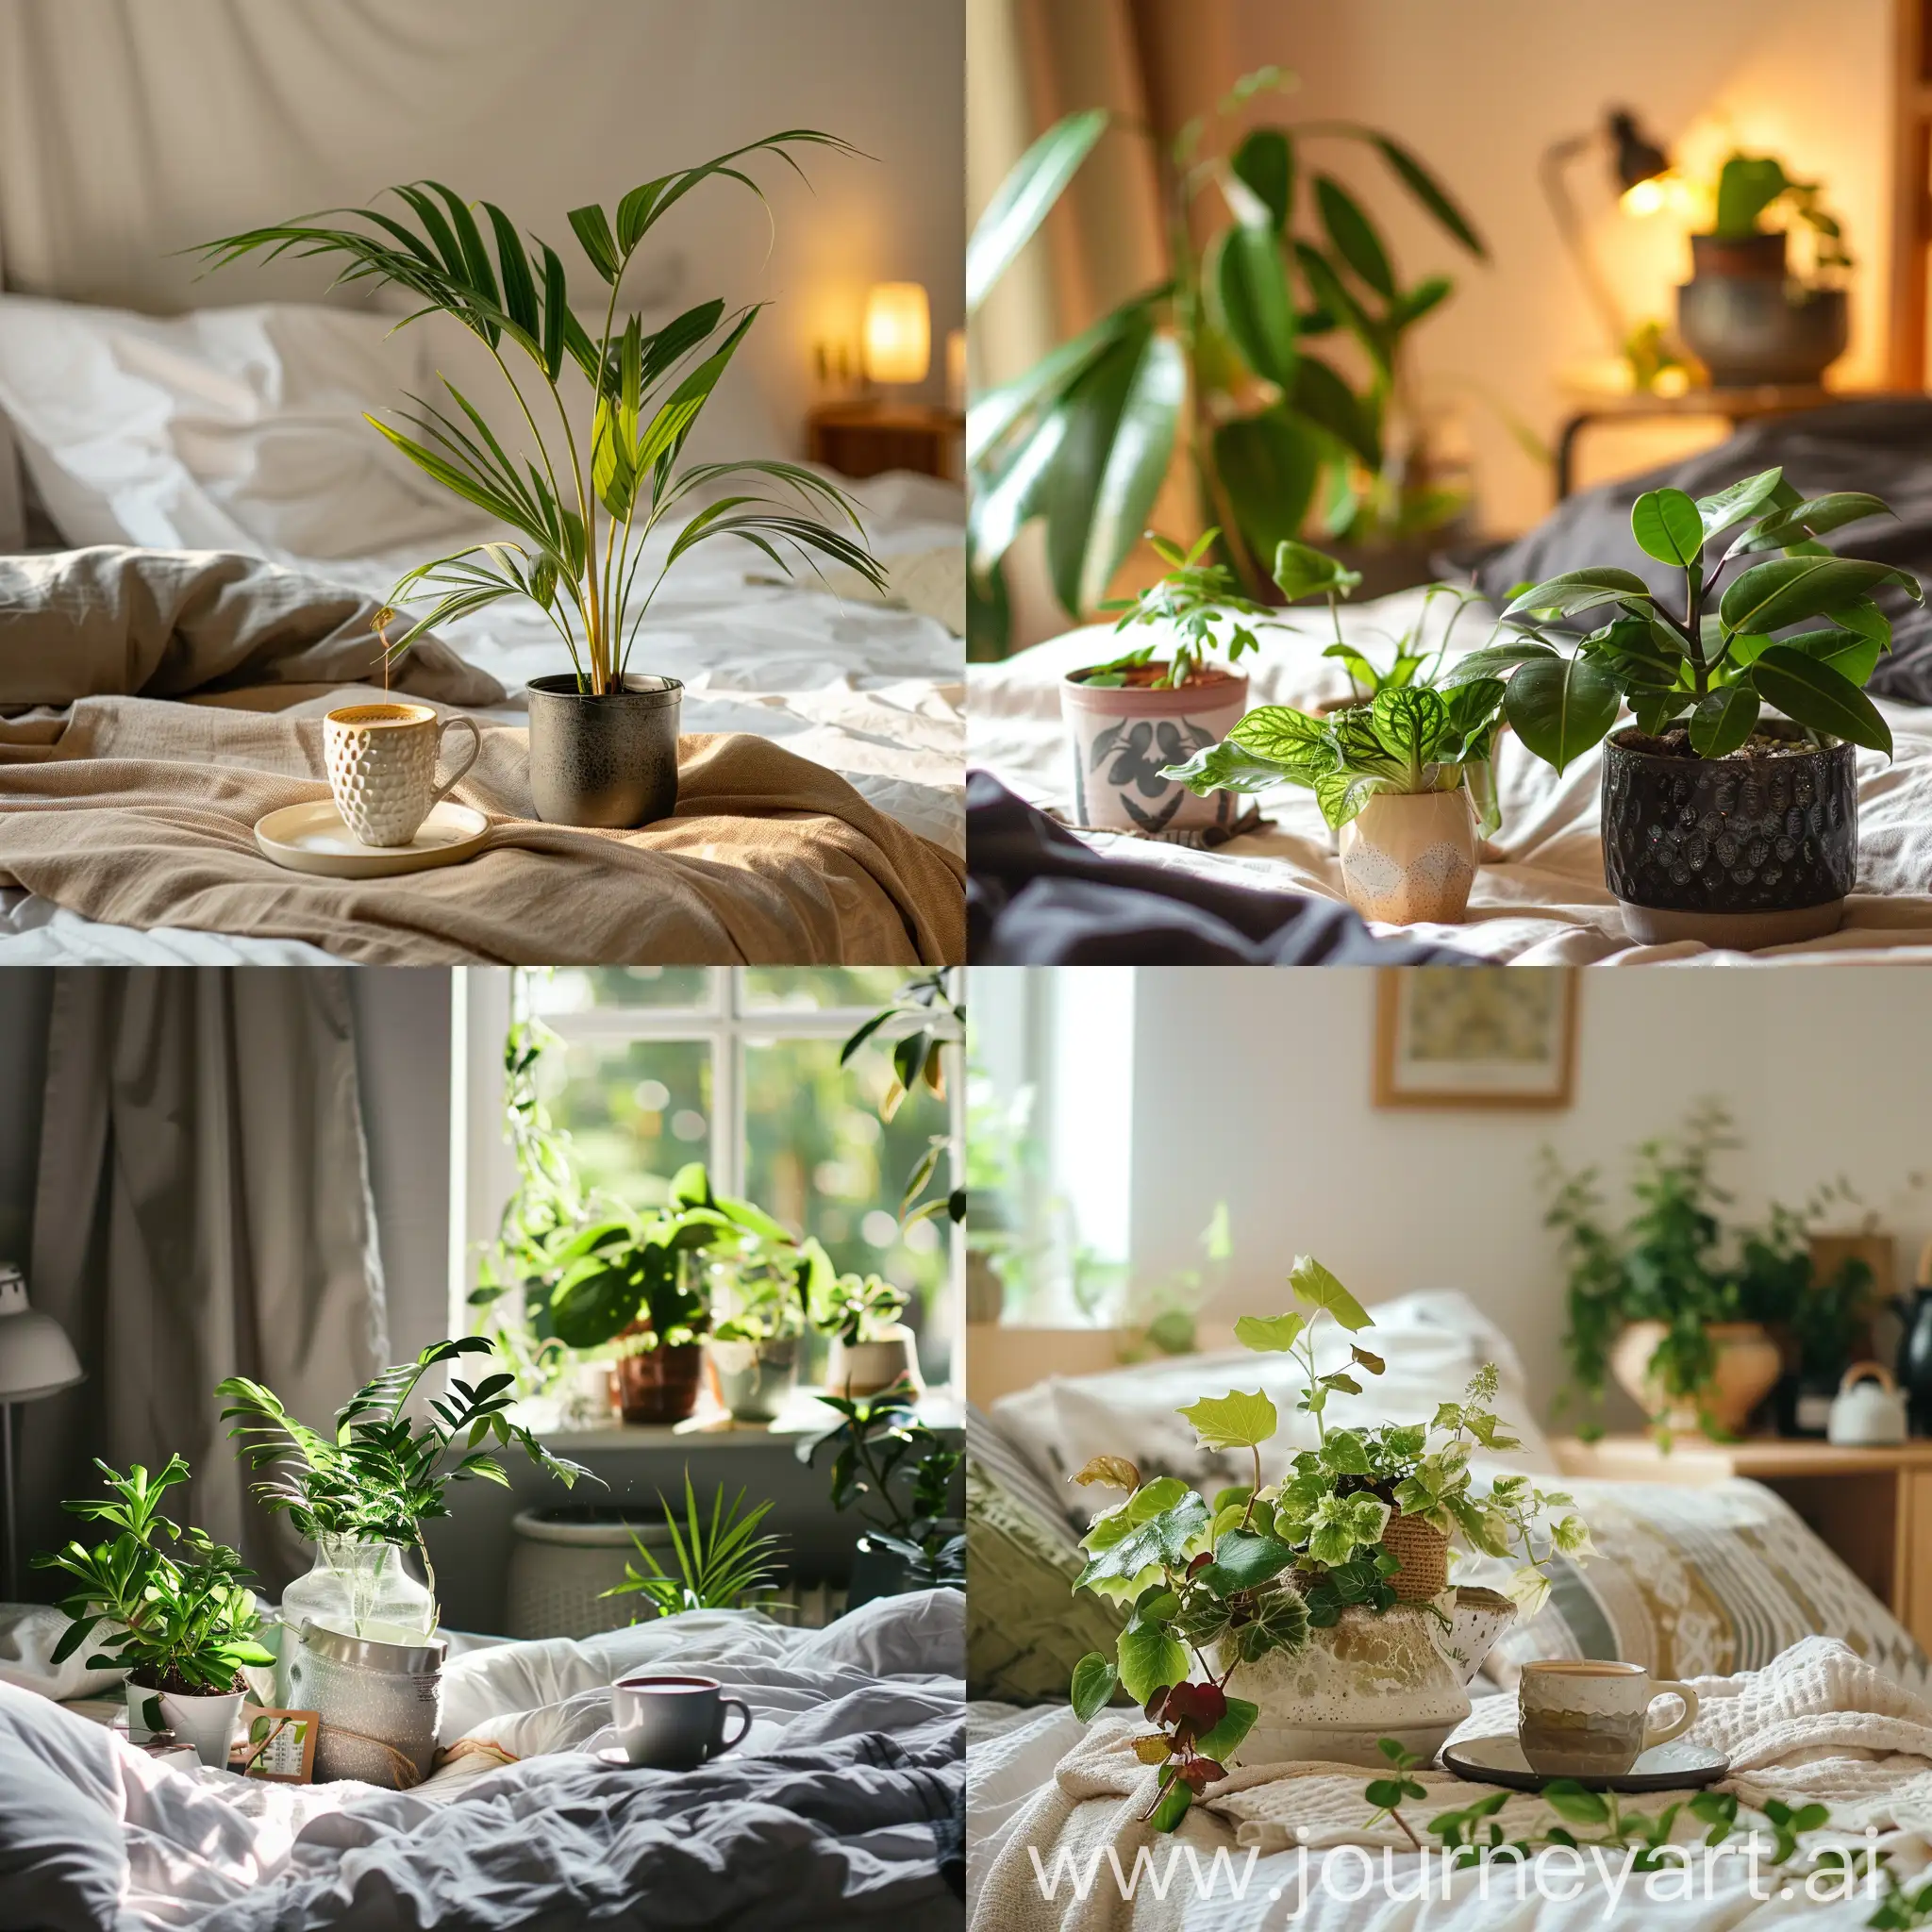 Joyful-Experience-Redeem-90-Voucher-for-Plant-Shopping-90-Hugs-and-90-Coffees-Delivered-to-Your-Bed